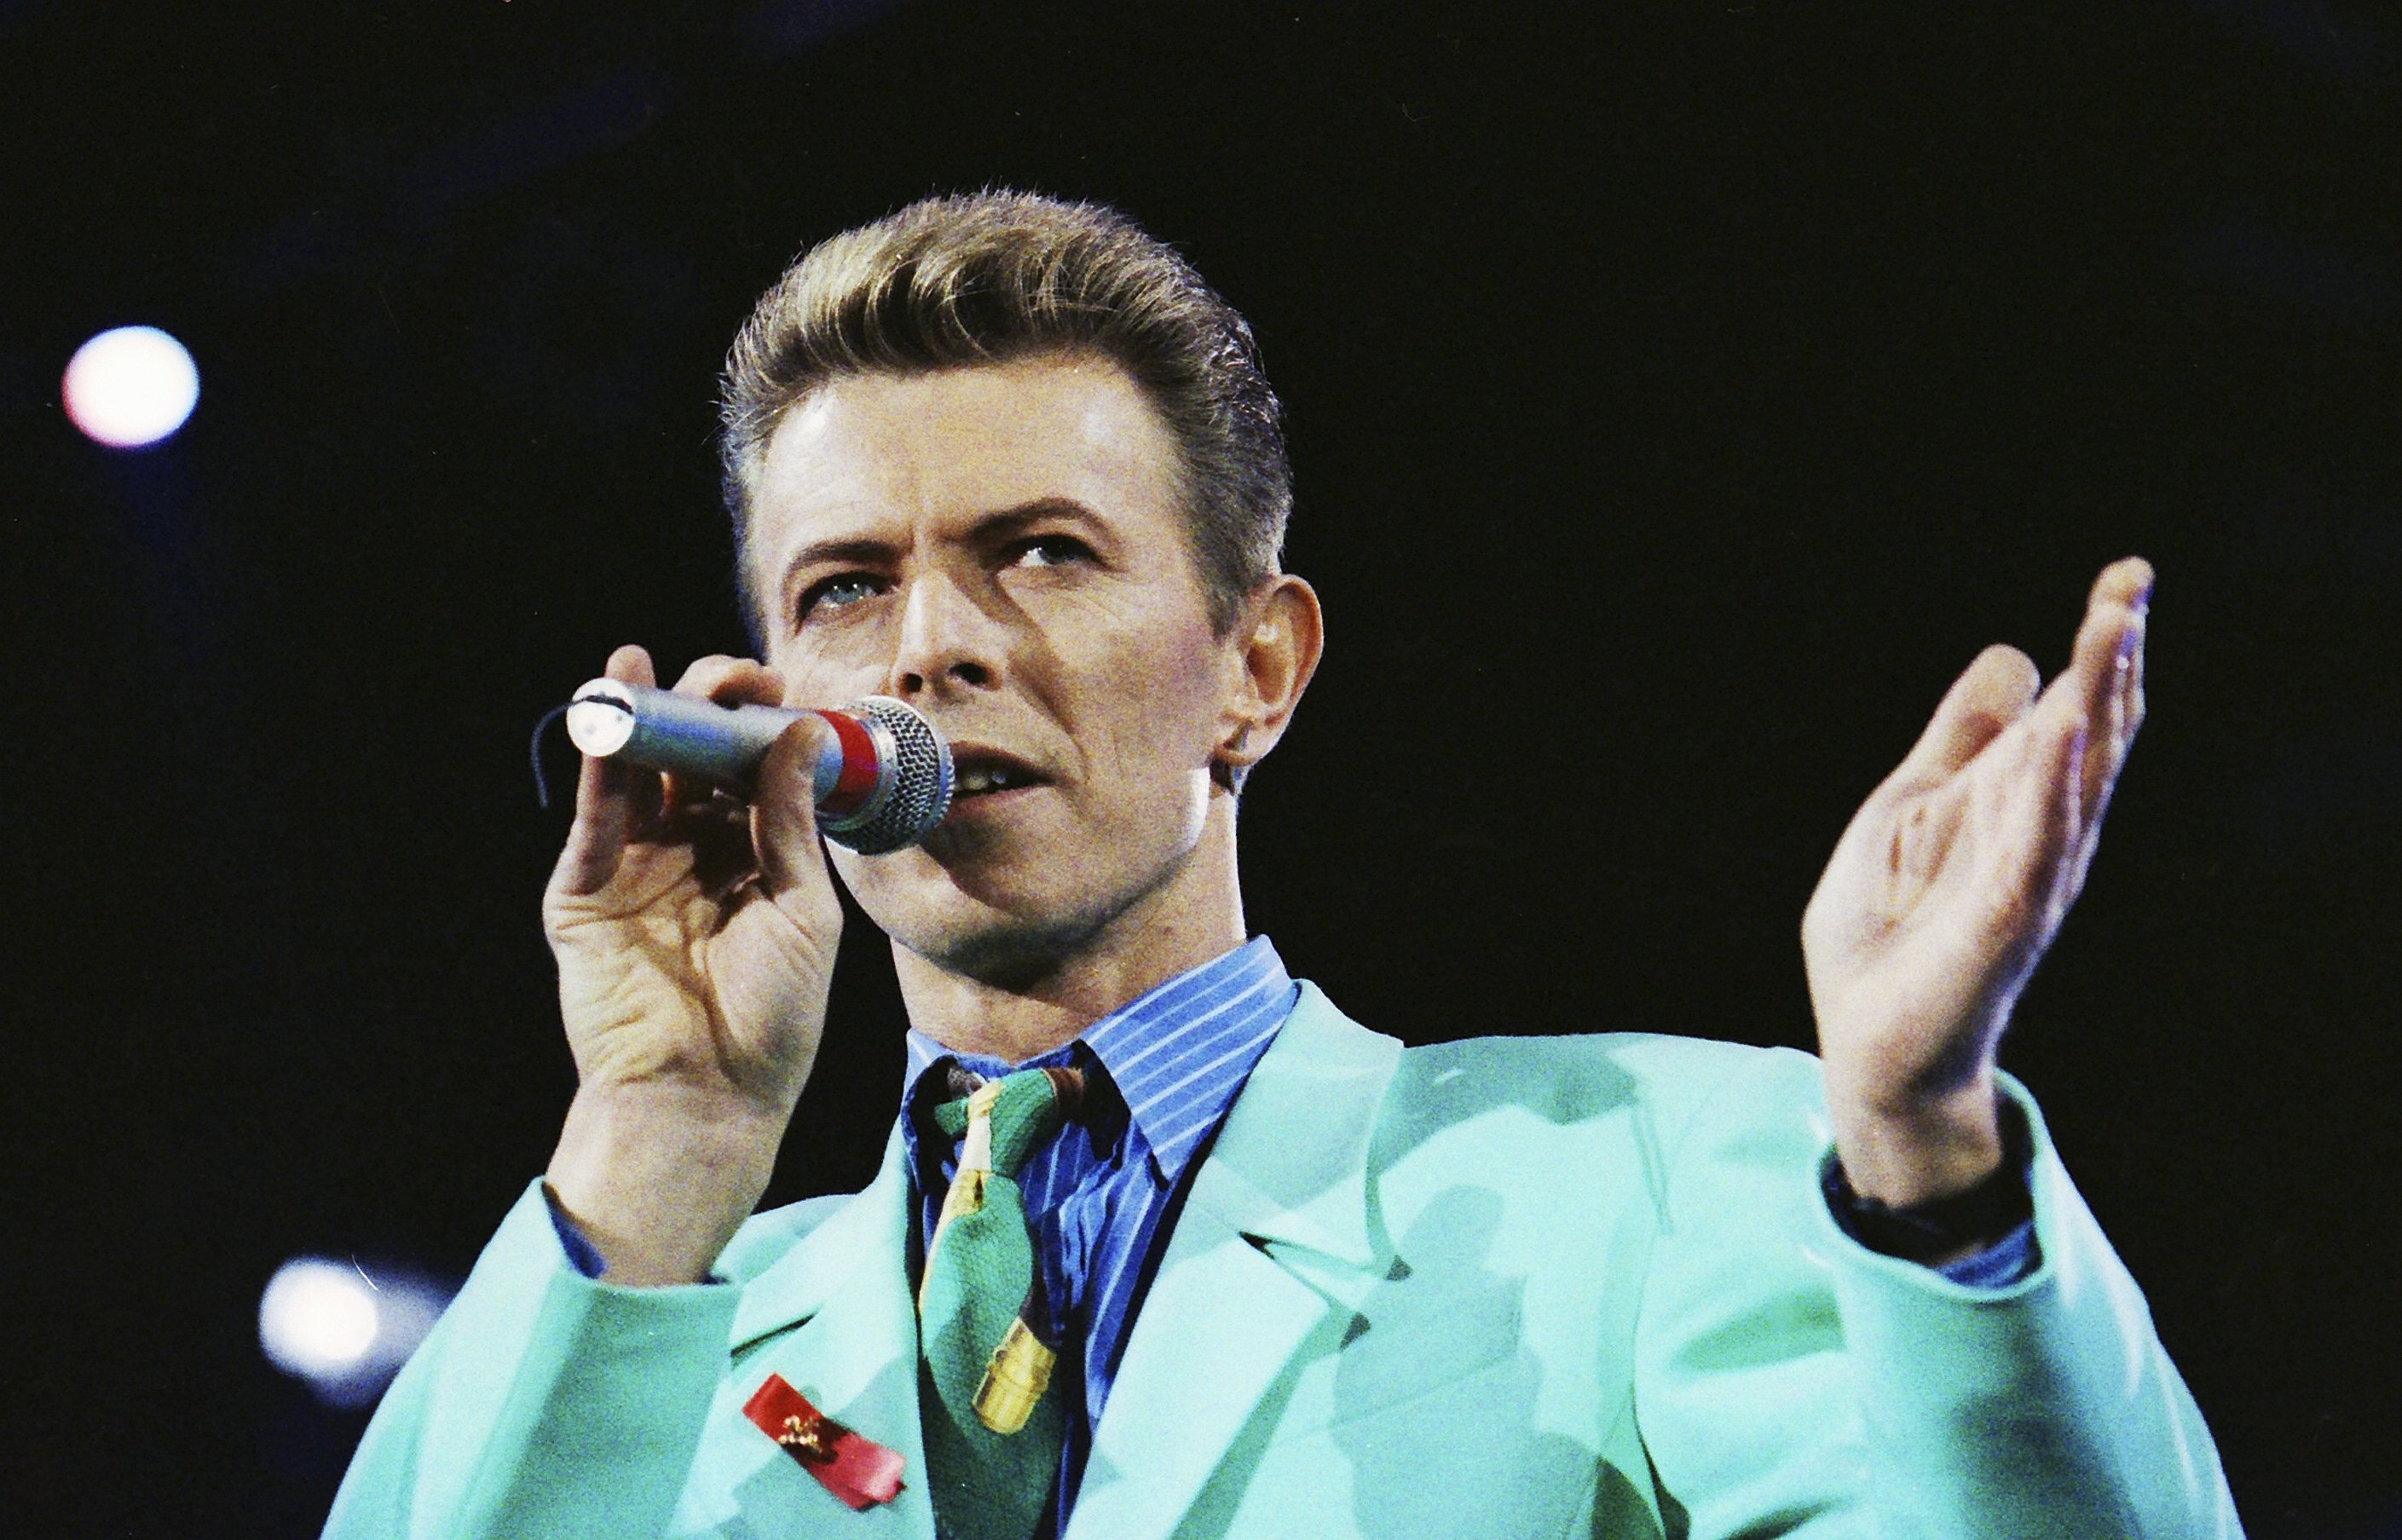 David Bowie performs on stage during The Freddie Mercury Tribute Concert at Wembley Stadium in London, Britain in this April 20, 1992, file photo. Bowie, the visionary British rock star who died at age 69 of cancer earlier this month, reportedly directed in his will that his ashes be sprinkled in Bali, where he vacationed. REUTERS/Dylan Martinez/Files